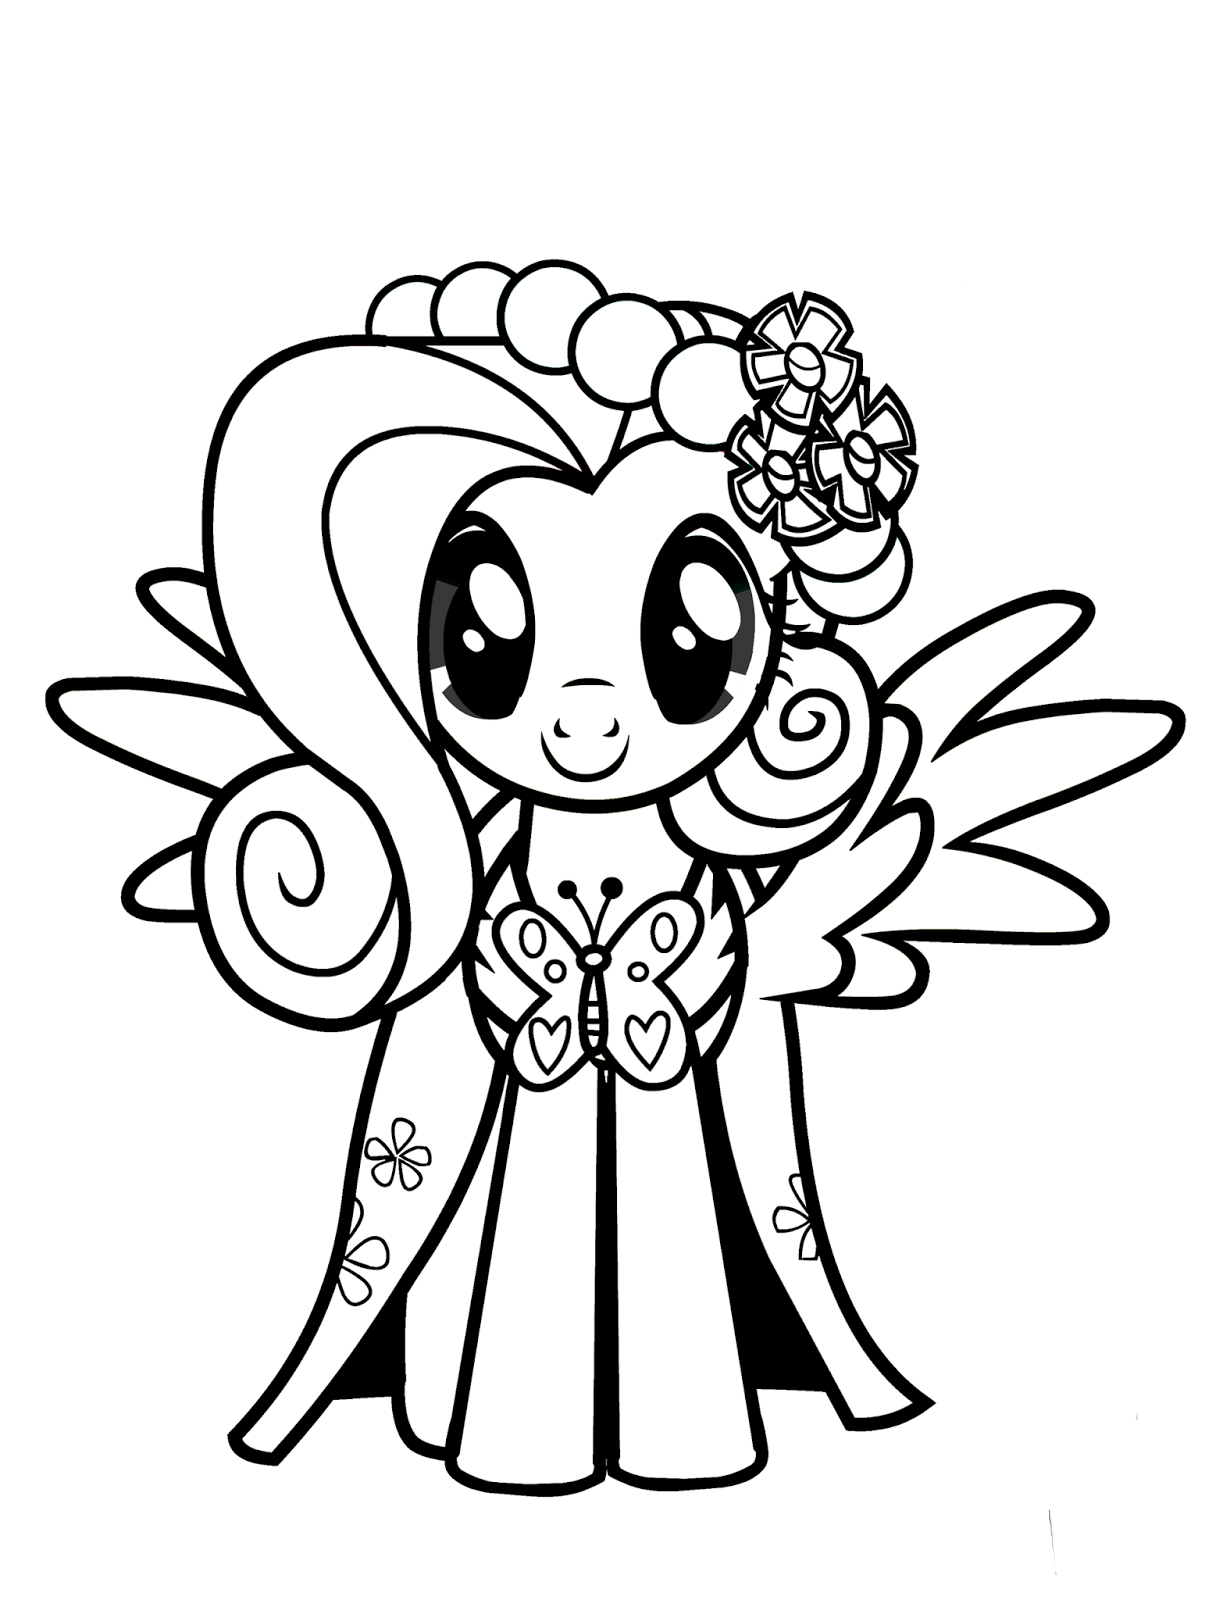 Fluttershy Coloring Pages Best Coloring Pages For Kids